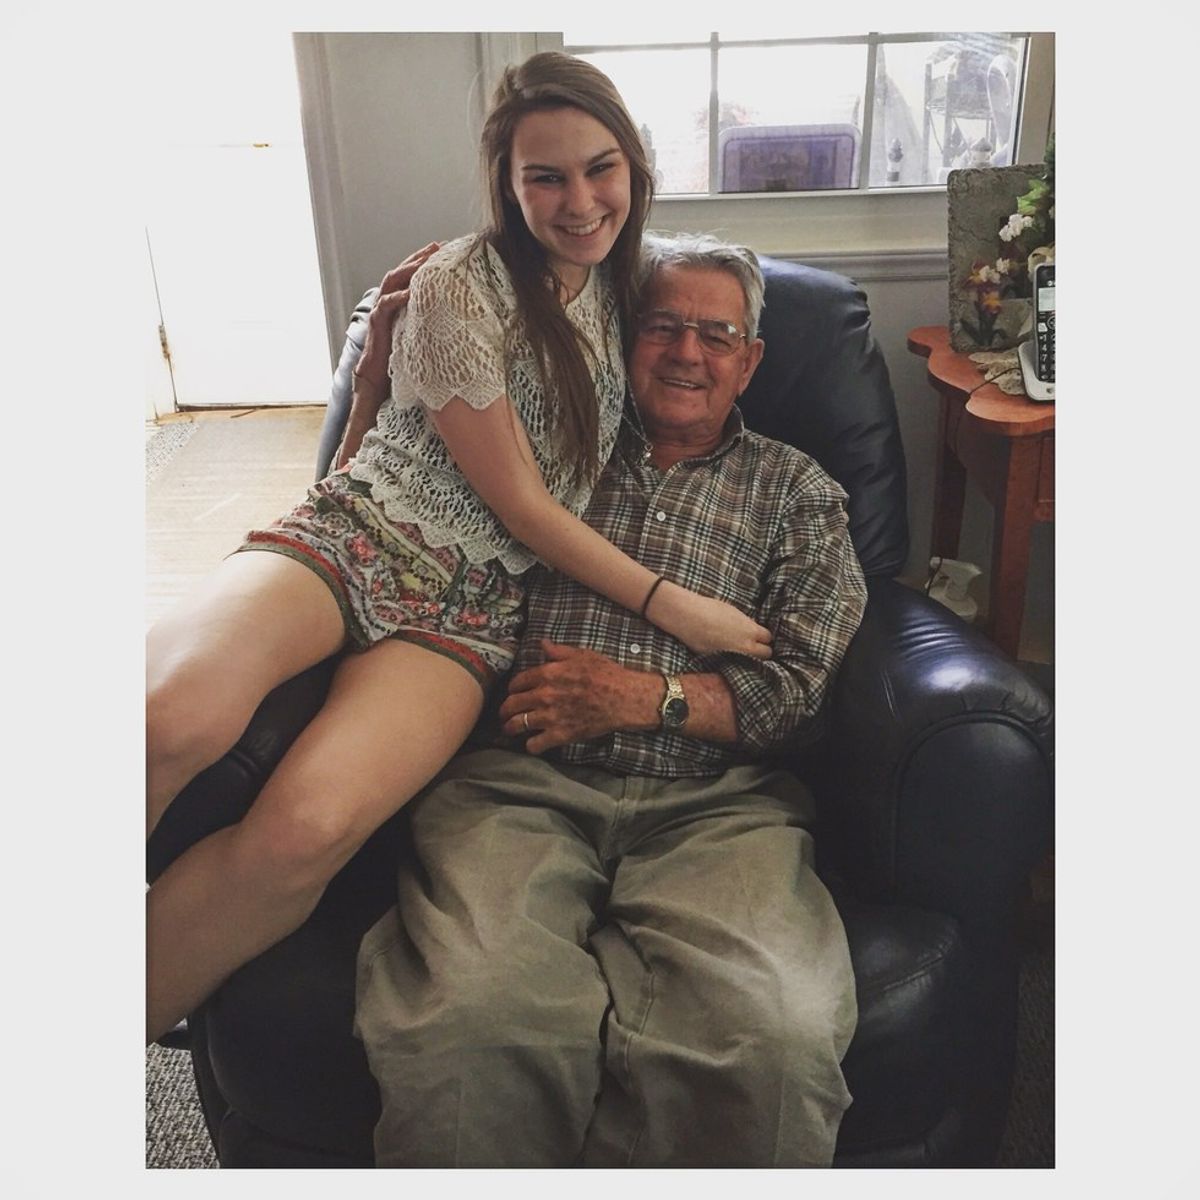 An Open Letter To My Grandfather With Cancer